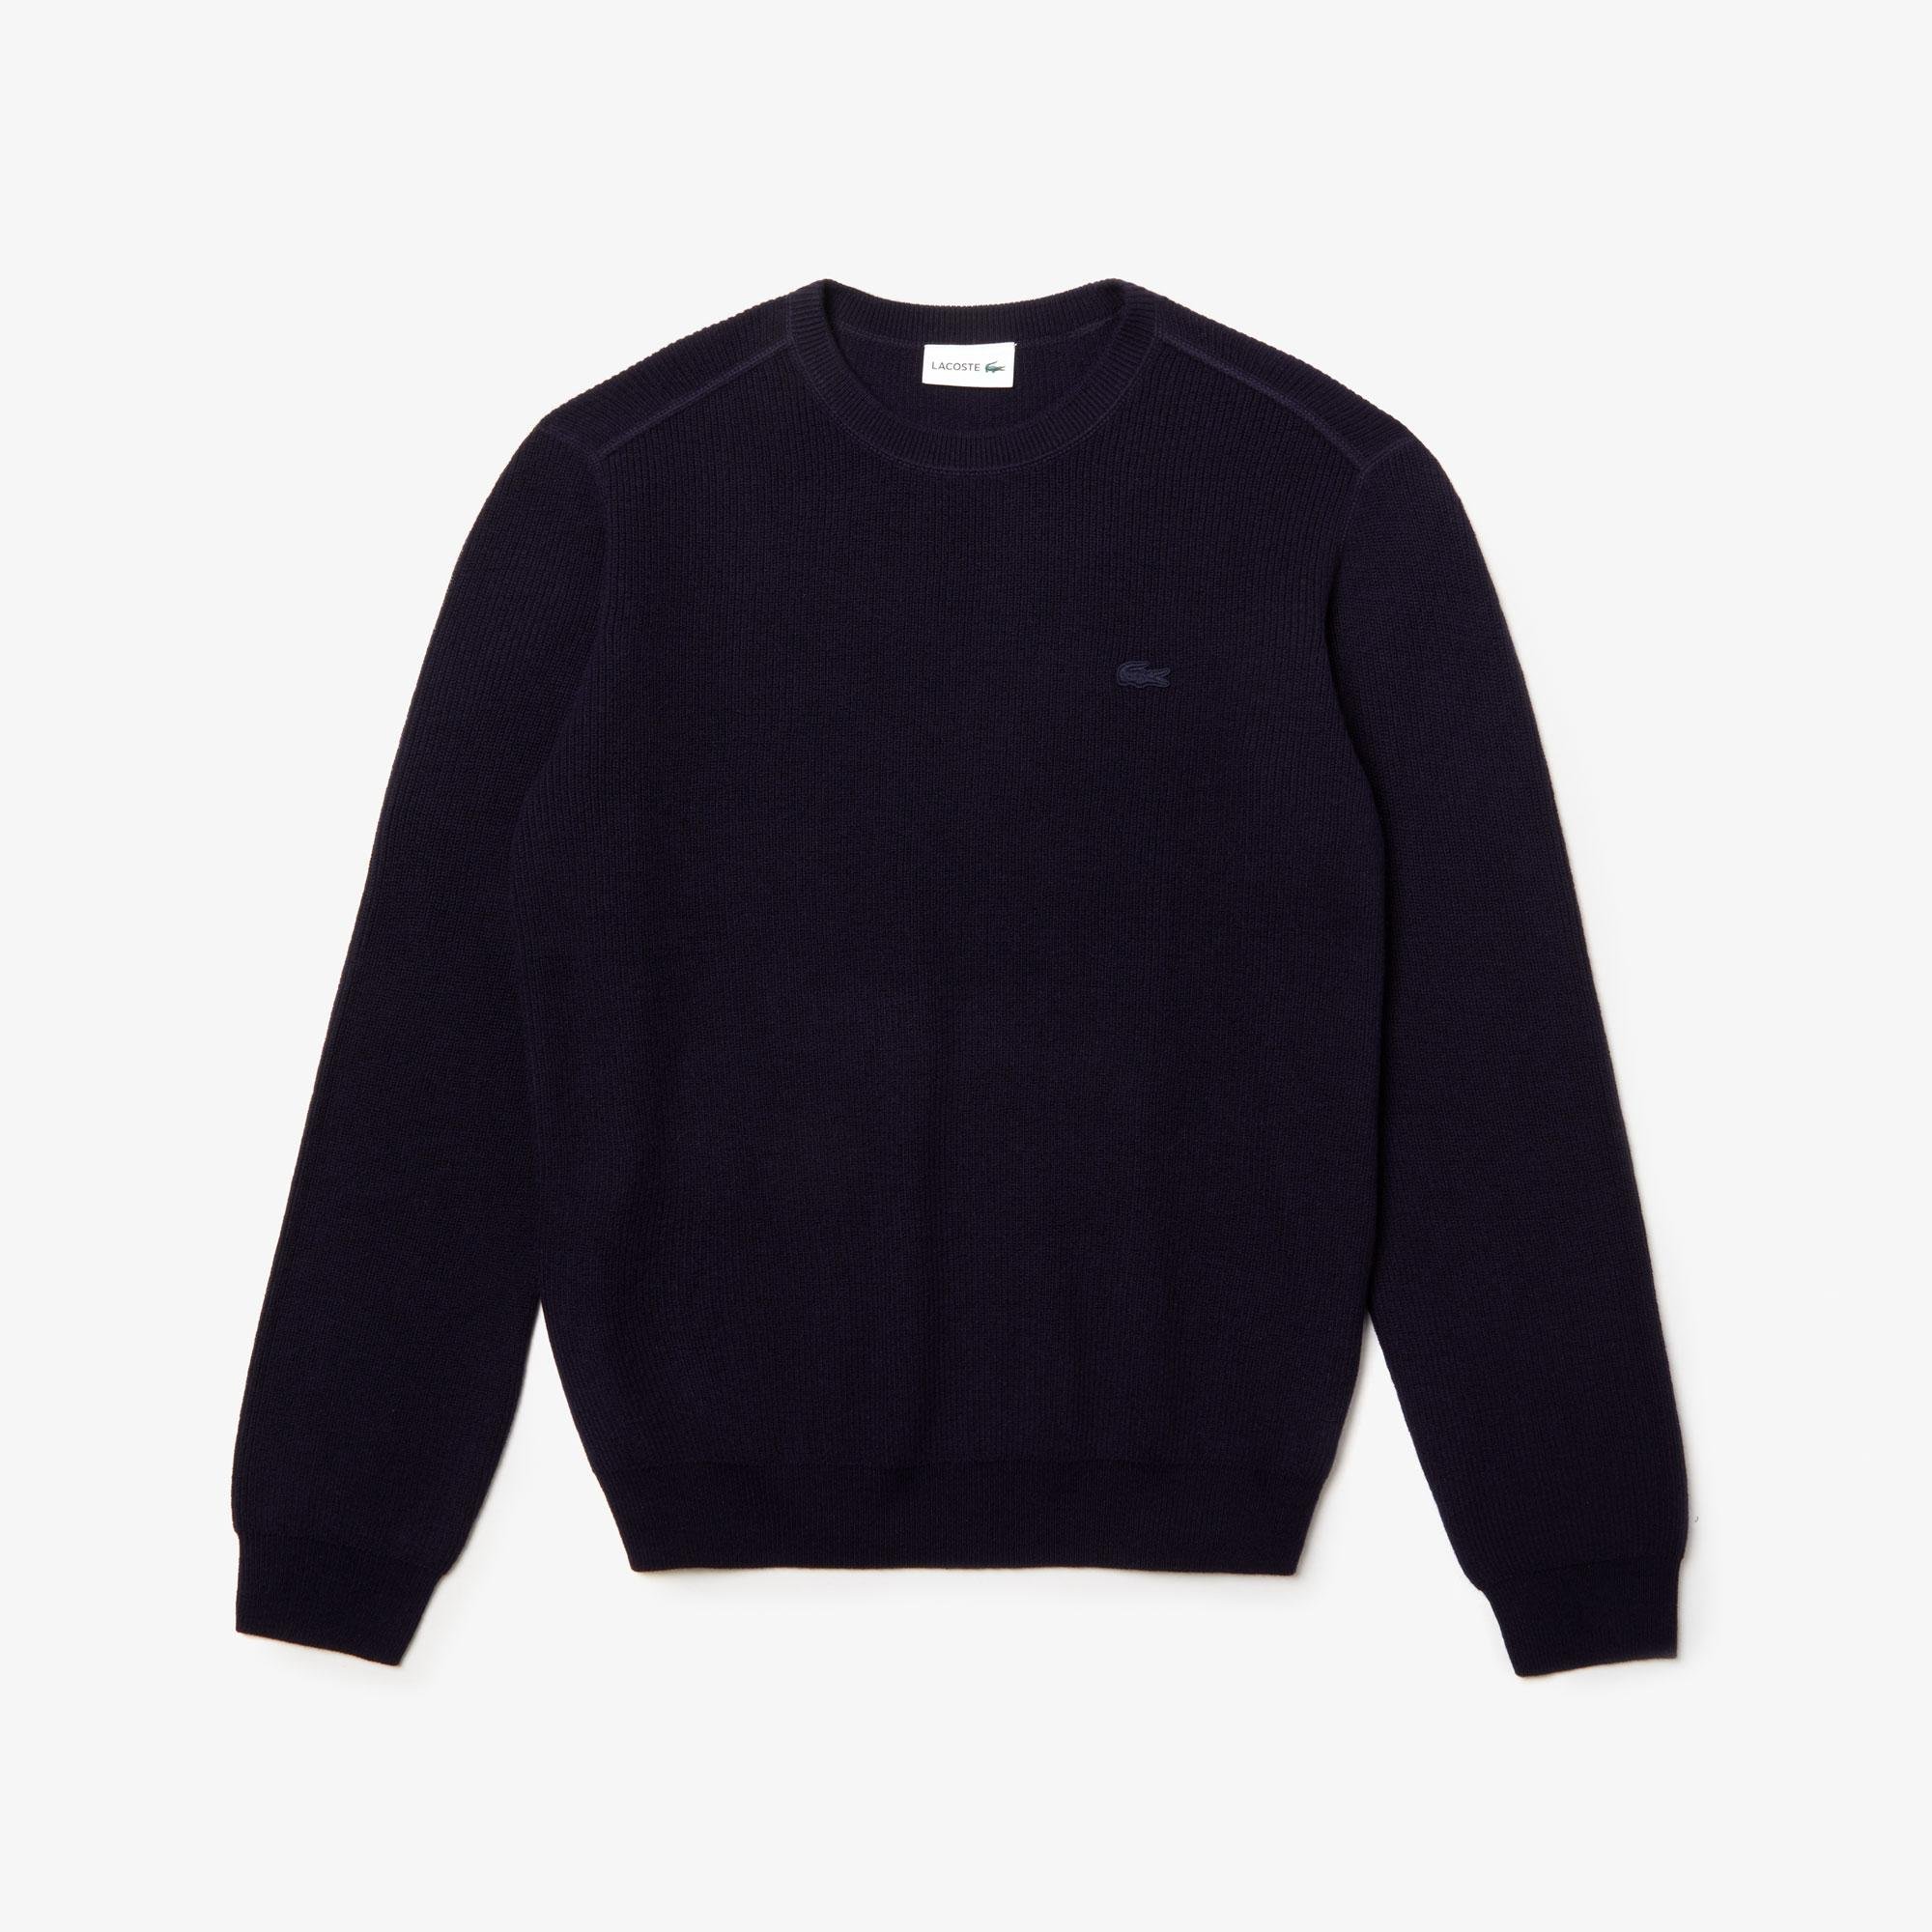 Lacoste Men's Crew Neck Wool And Cashmere Blend Knit Effect Sweater